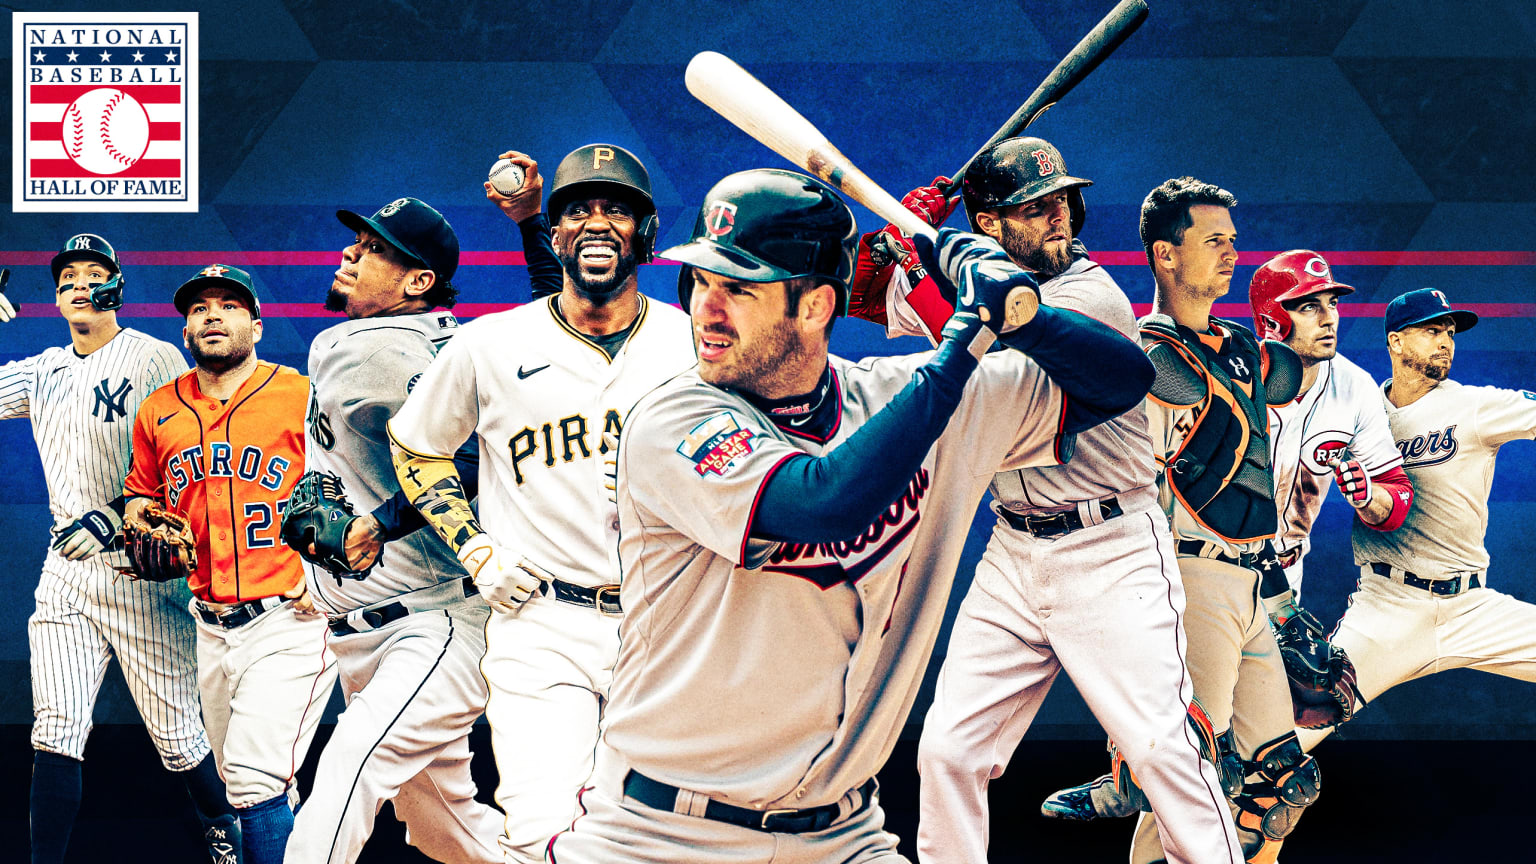 A designed image featuring Joe Mauer and potential future Hall of Famers